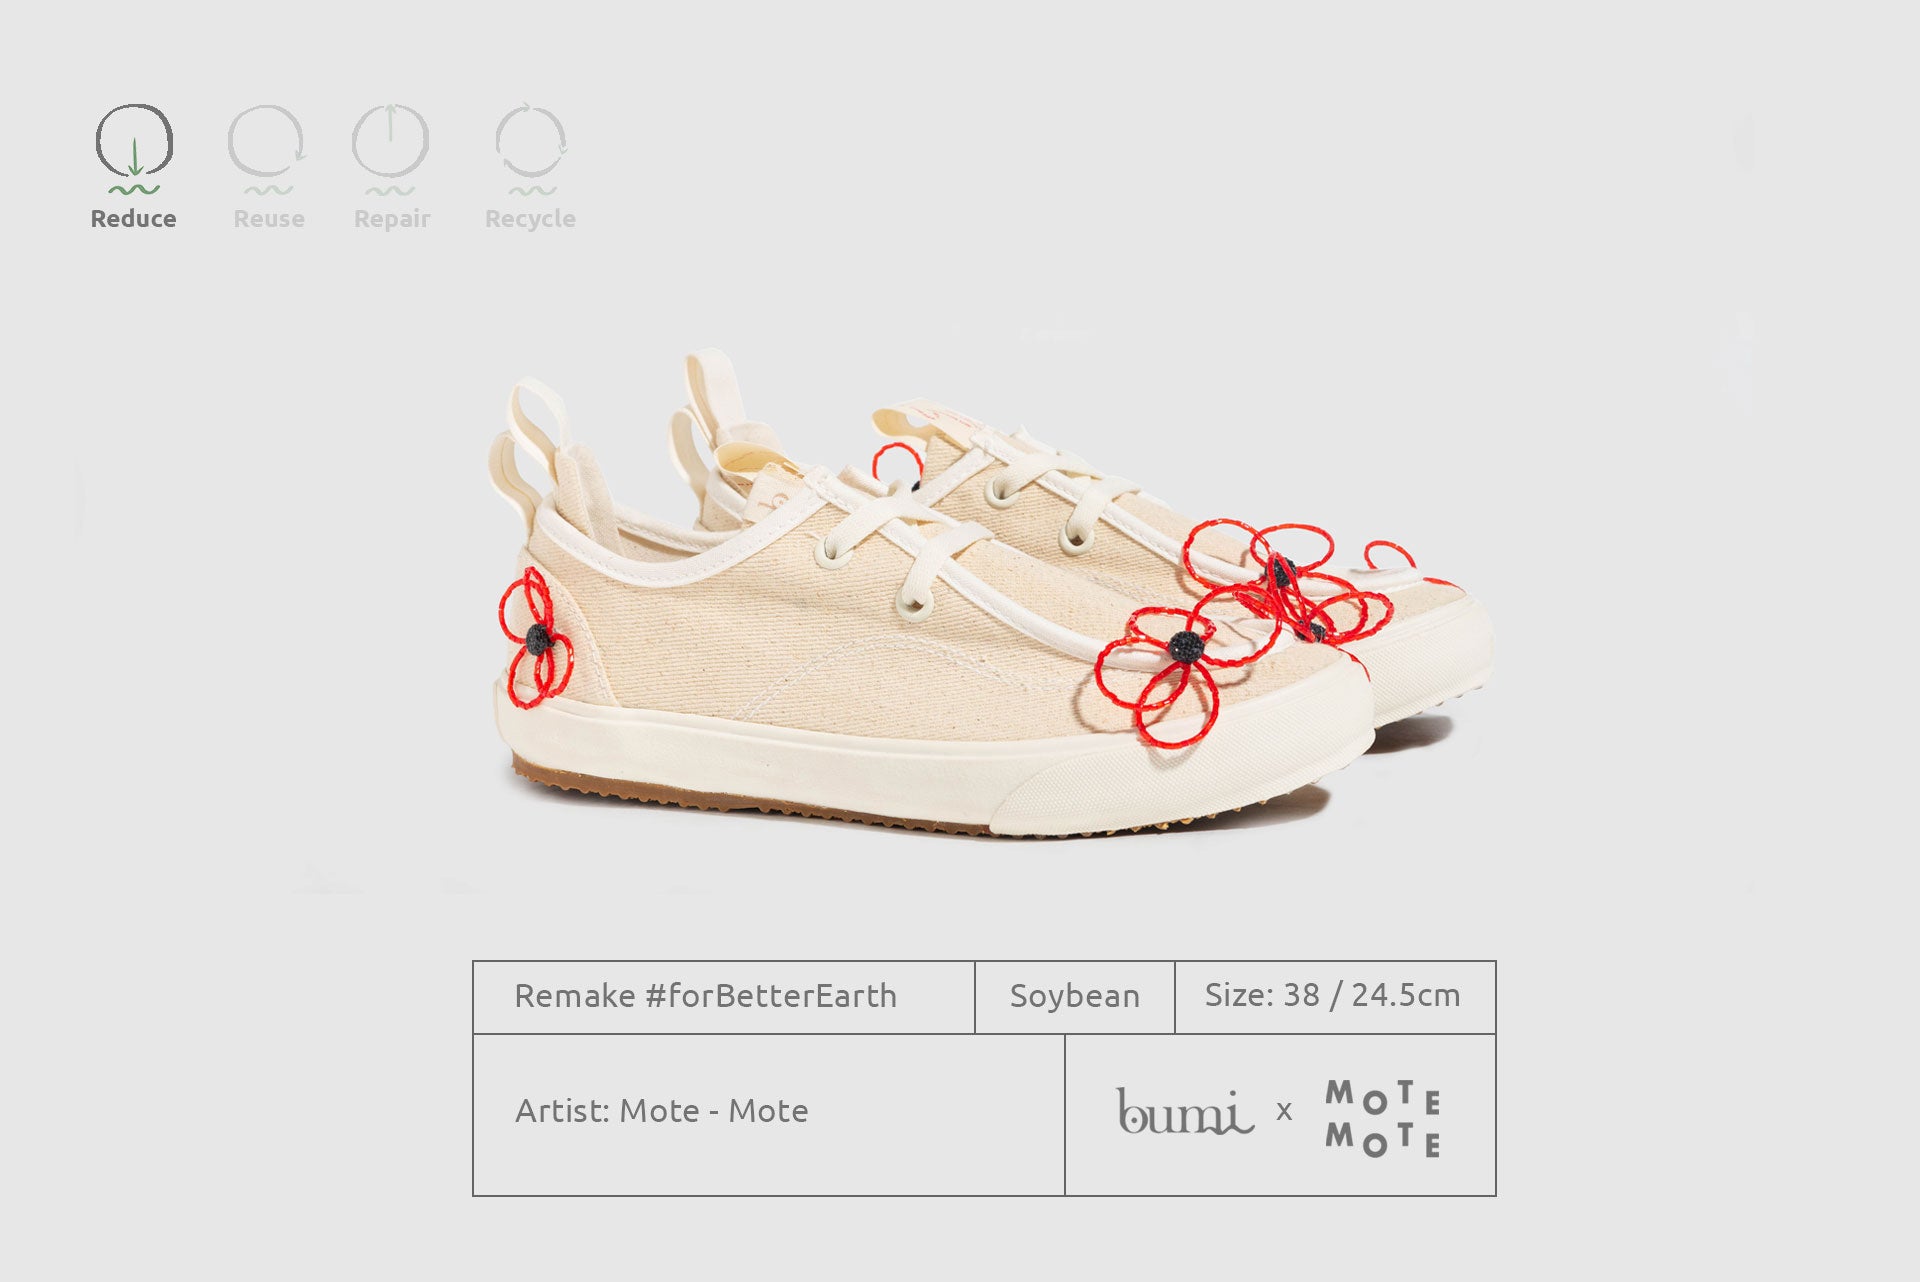 Kotta Hybrid Sneakers - Remade By Mote Mote